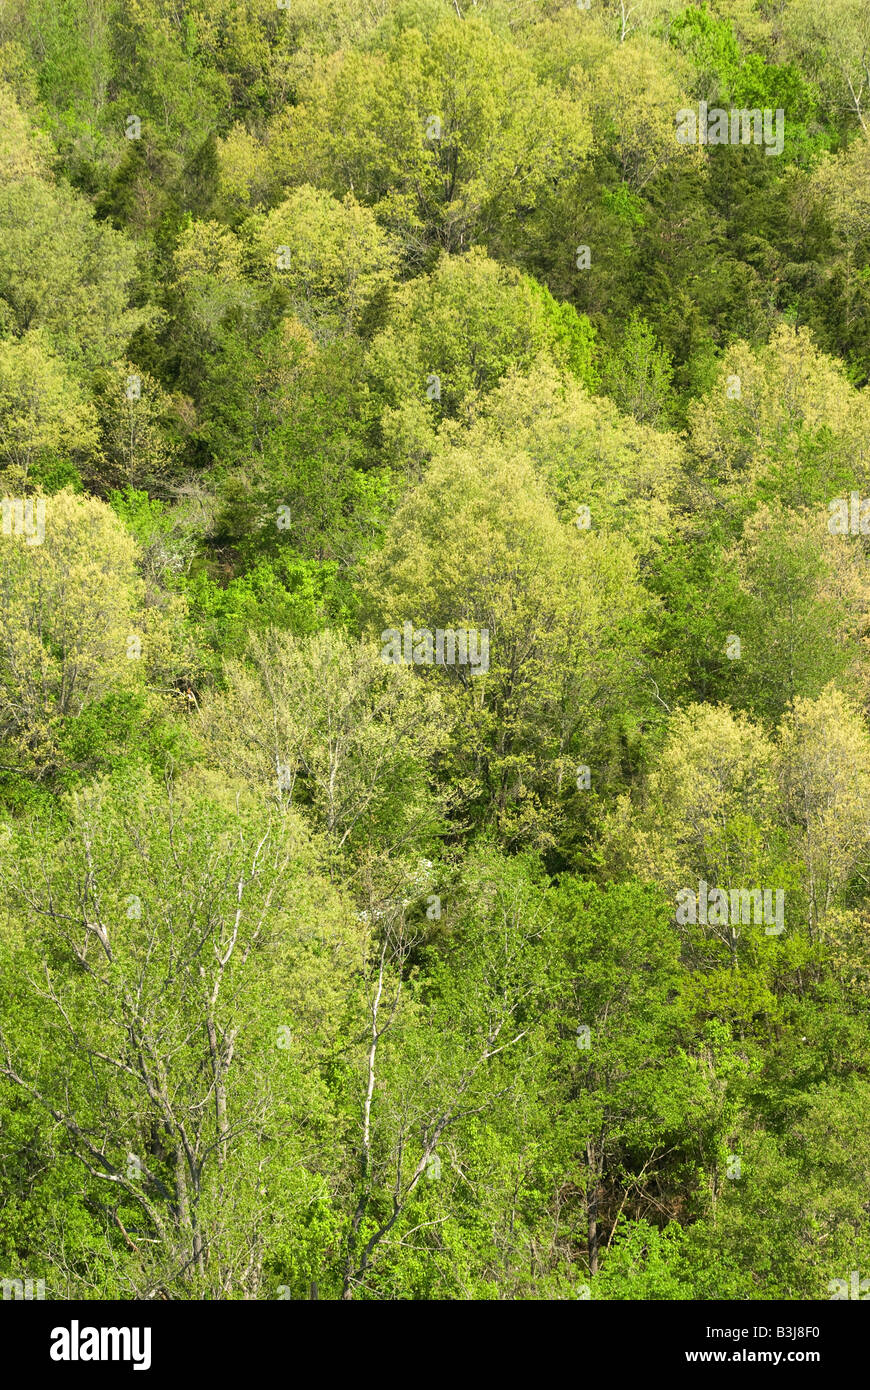 New spring foilage on deciduous trees along the Buffalo National River in the Ozark Mountains region of Arkansas Stock Photo